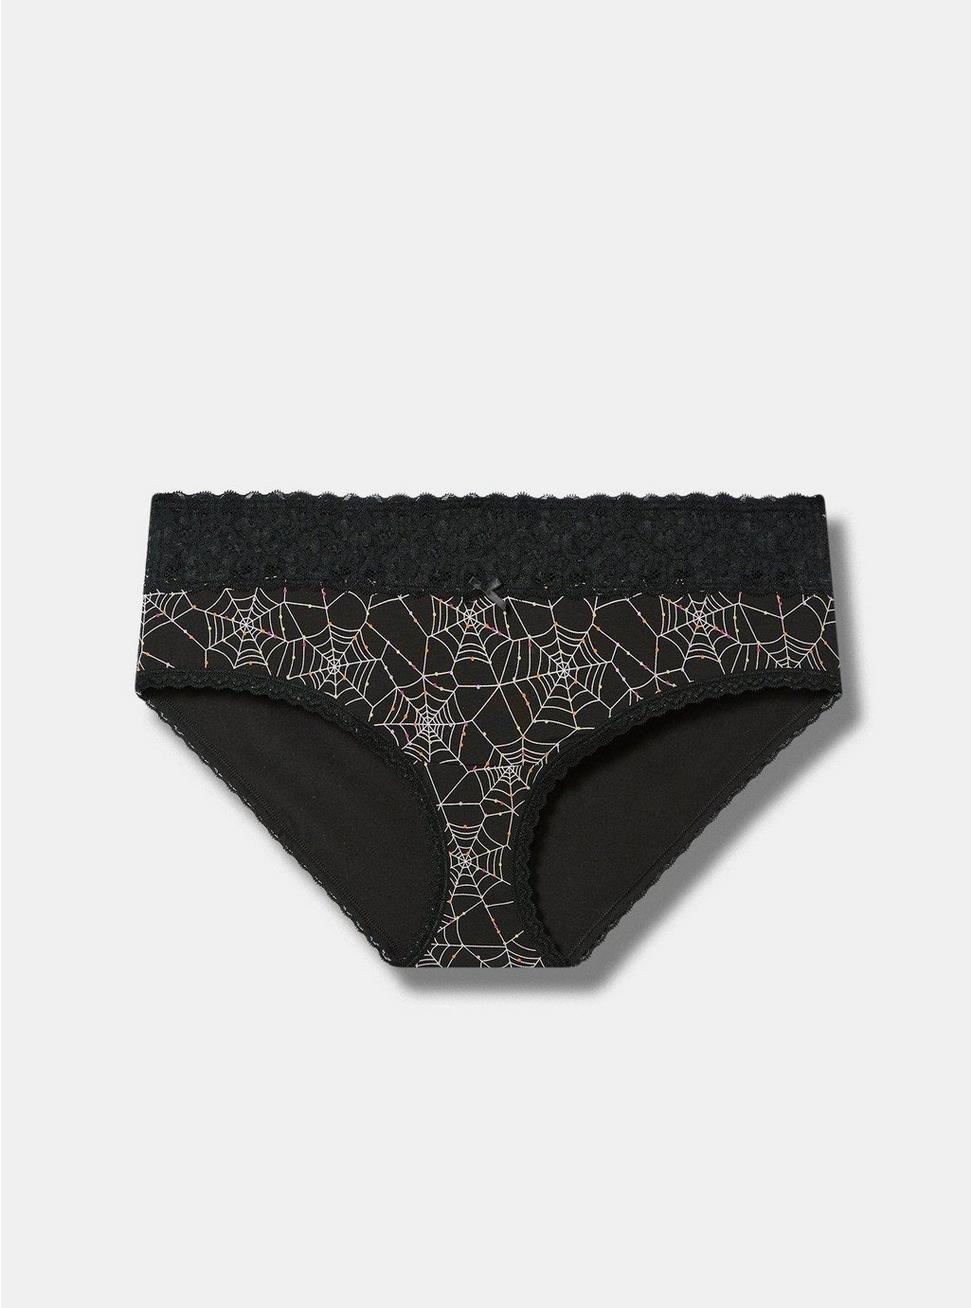 Plus Size Cotton Mid-Rise Hipster Lace Trim Panty, ALLOVER SPIDERWEBS BLACK, hi-res